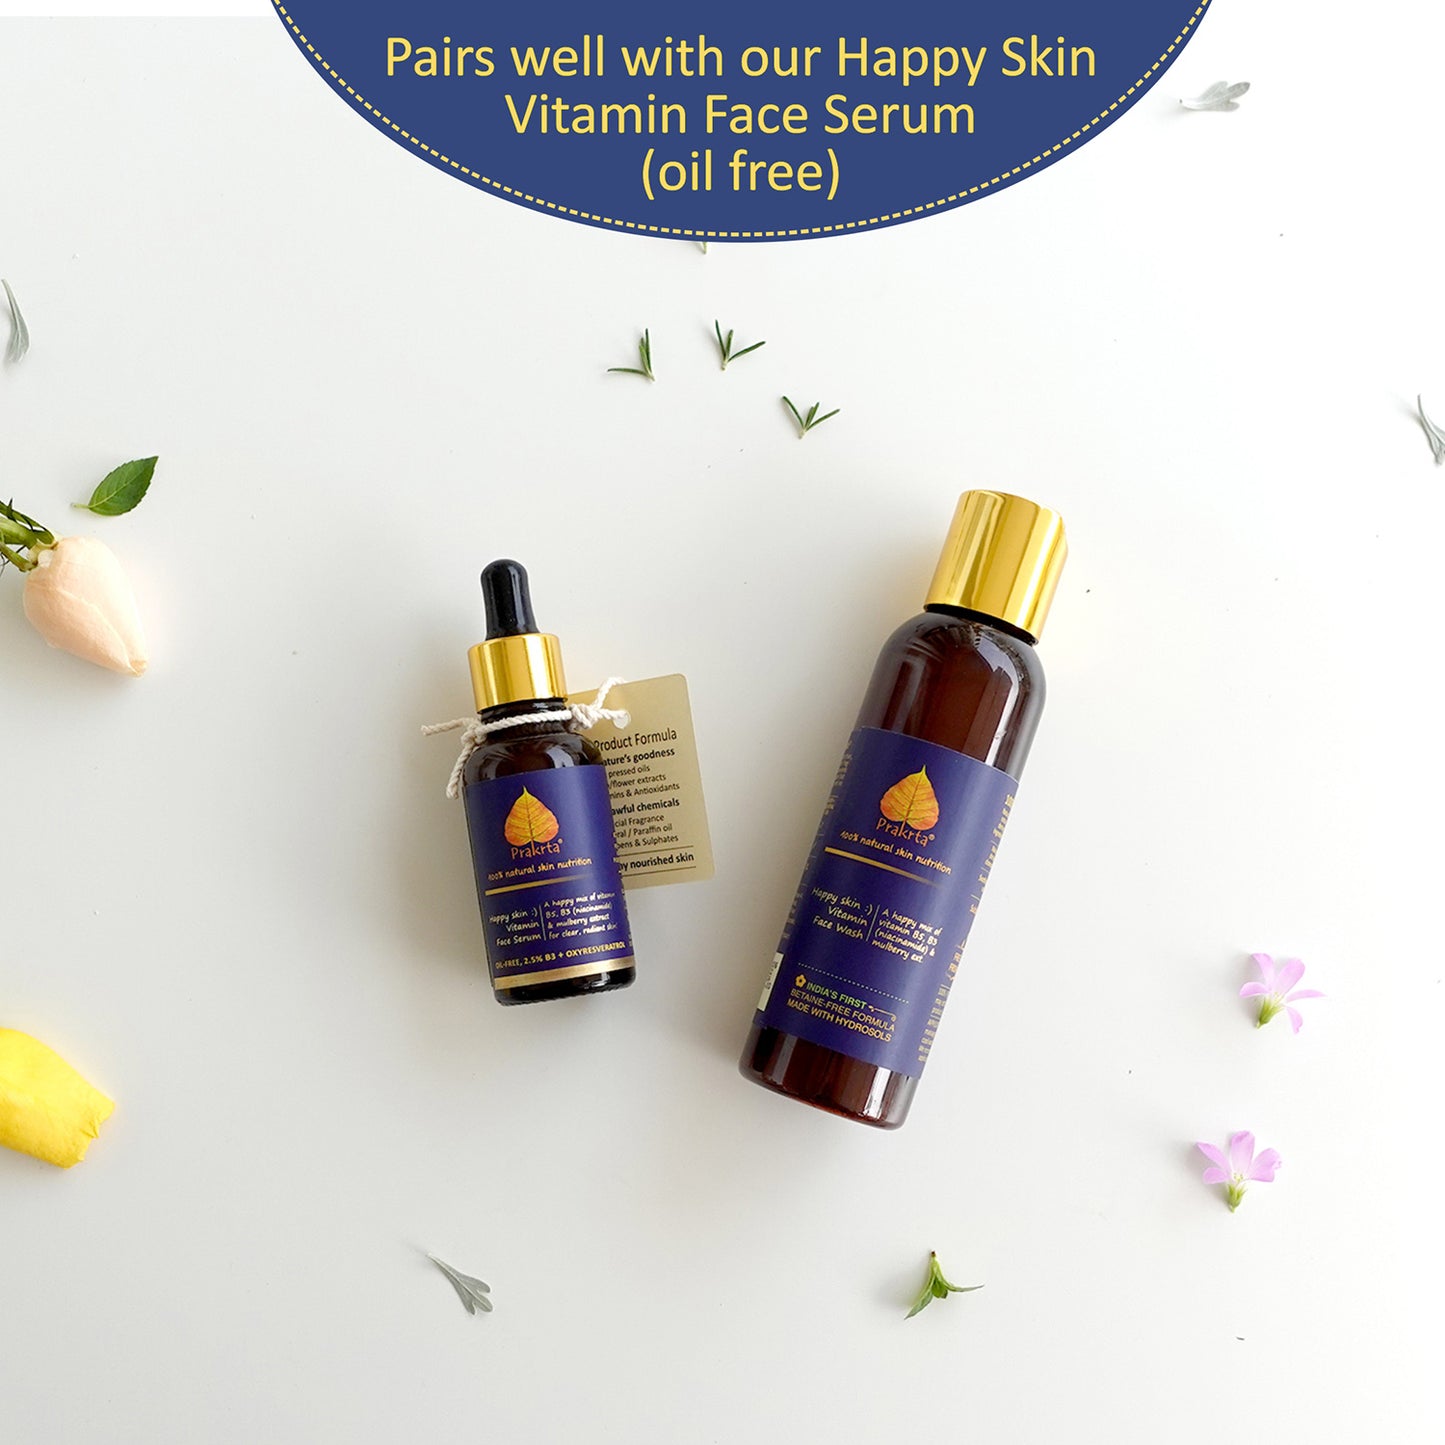 Happy skin :) vitamin face cleanser - A happy mix of Vit B3 (niacinamide), B5 and mulberry in an all natural cleansing base